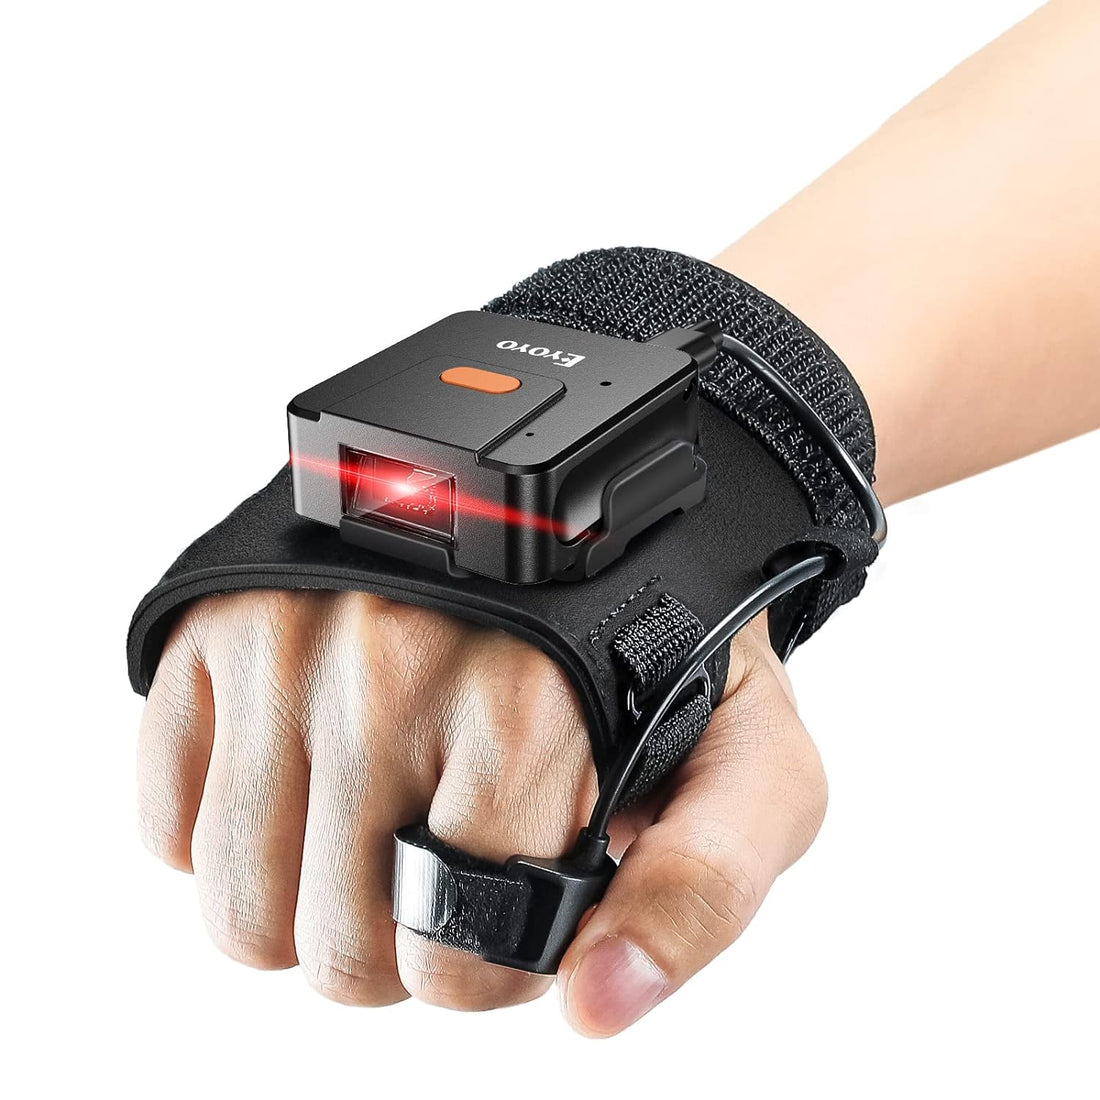 Eyoyo Wearable Glove Ring Bluetooth Barcode Scanner, Left&Right Hand Wearable,1D Finger Trigger Wireless Bar Code Reader Inventory with Retractable Lanyard Compatible with iPhone iPad Android Tablet